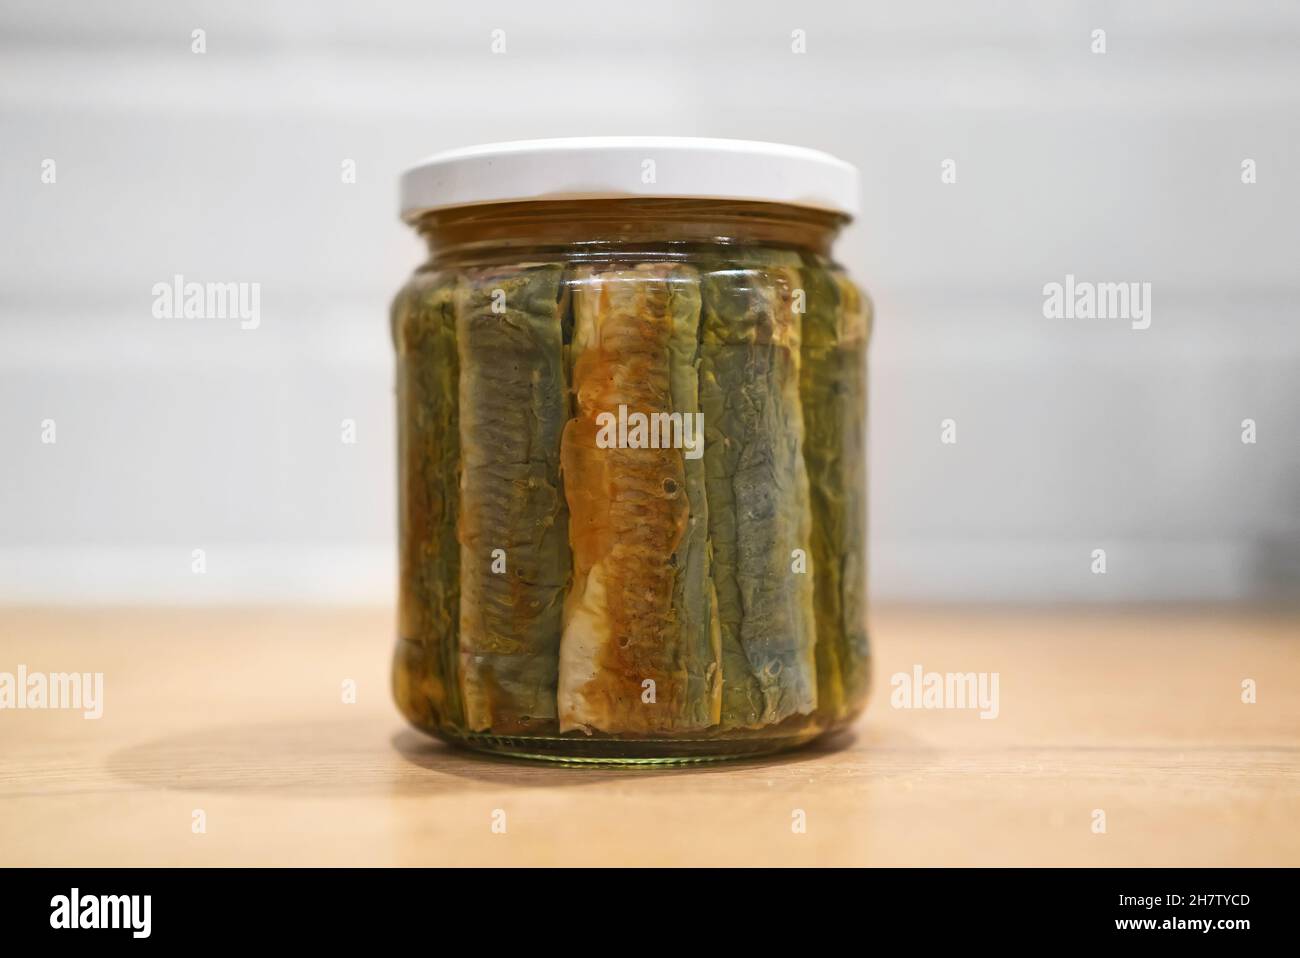 Homemade canned fried lamprey fish with marinade. Stock Photo